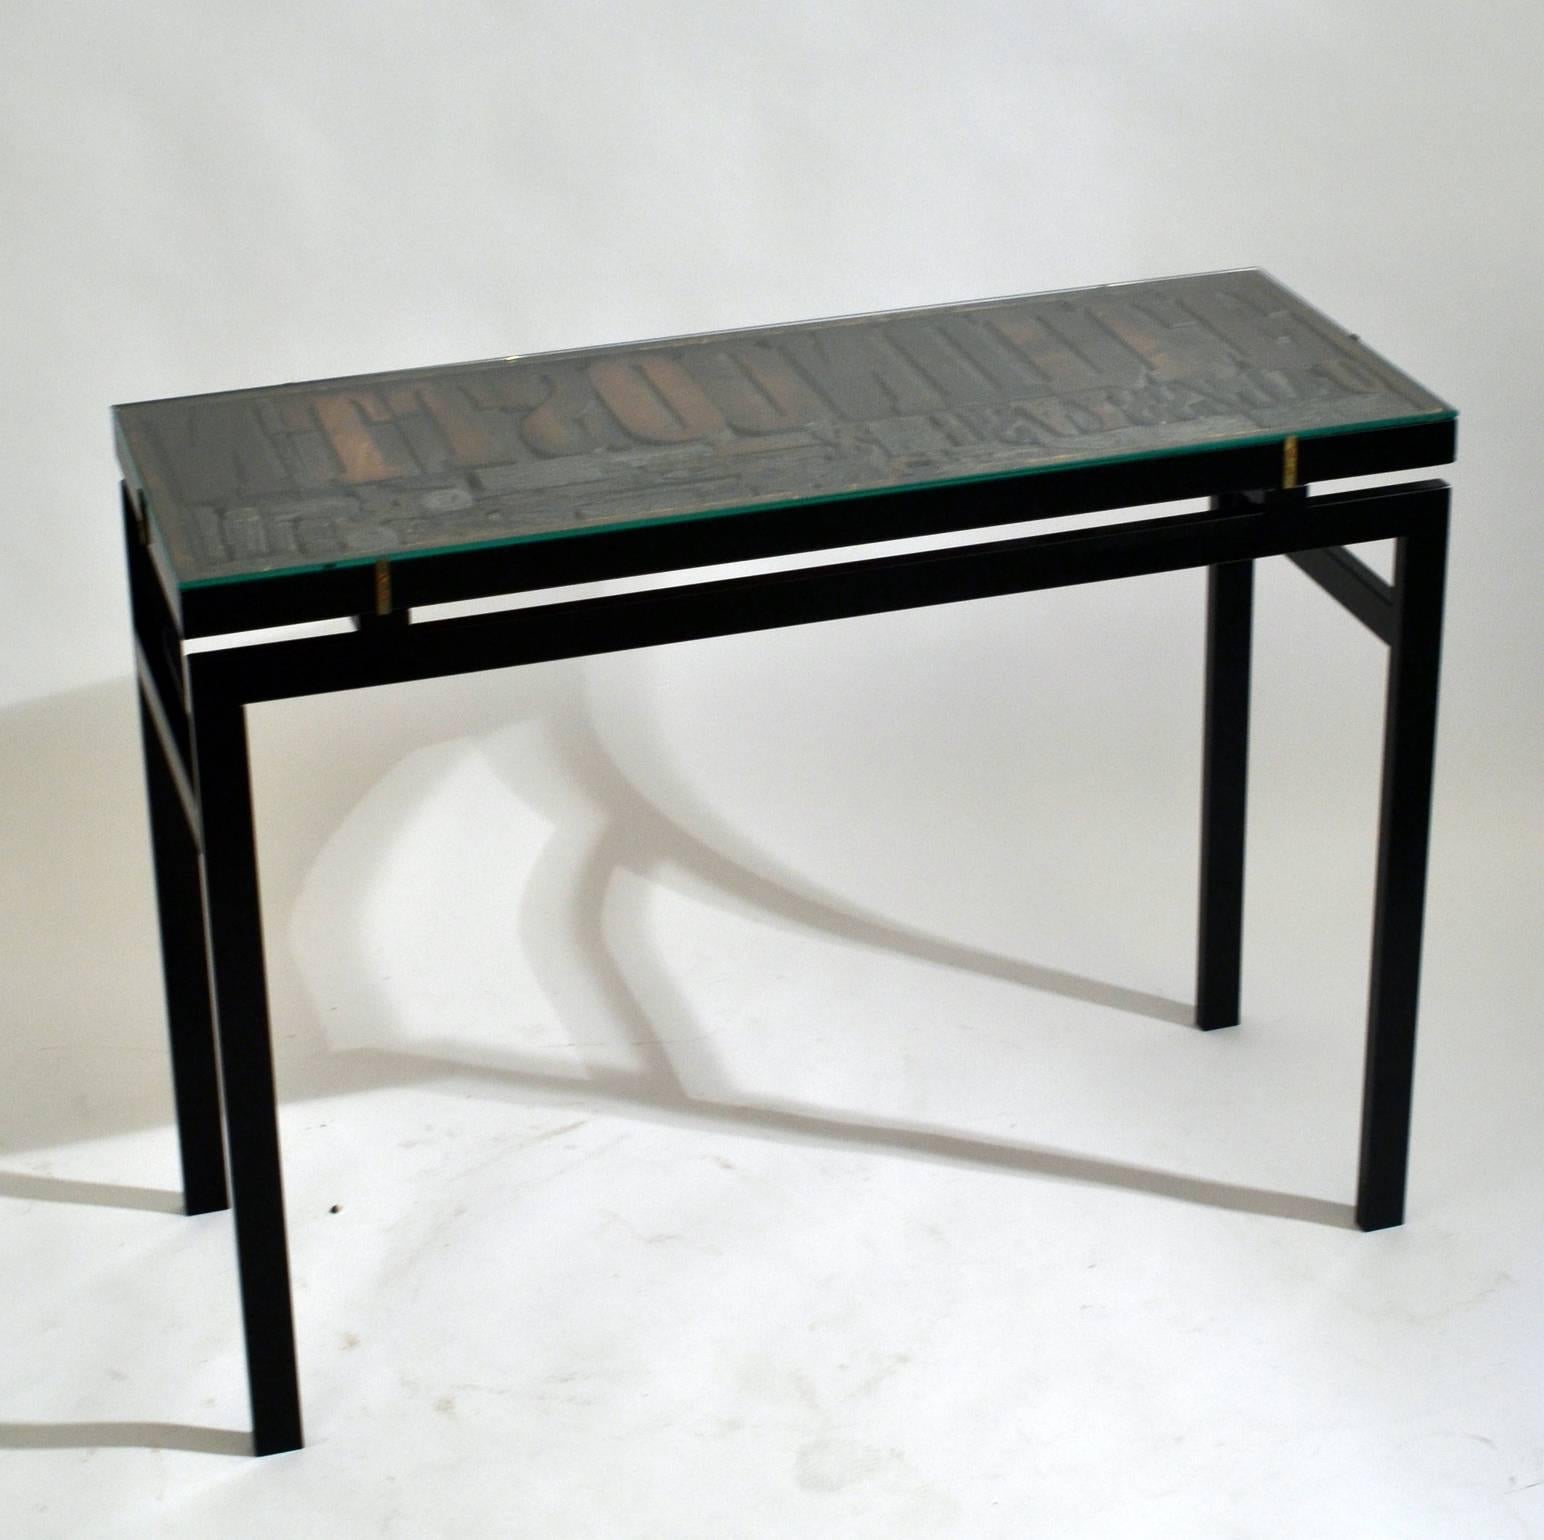 Console specially designed to display 1920s typography letters housed in its original wooden typesetter tray with a variety of wooden vintage letterpress printing blocks of letters, numbers and copper characters placed in a contemporary custom-made